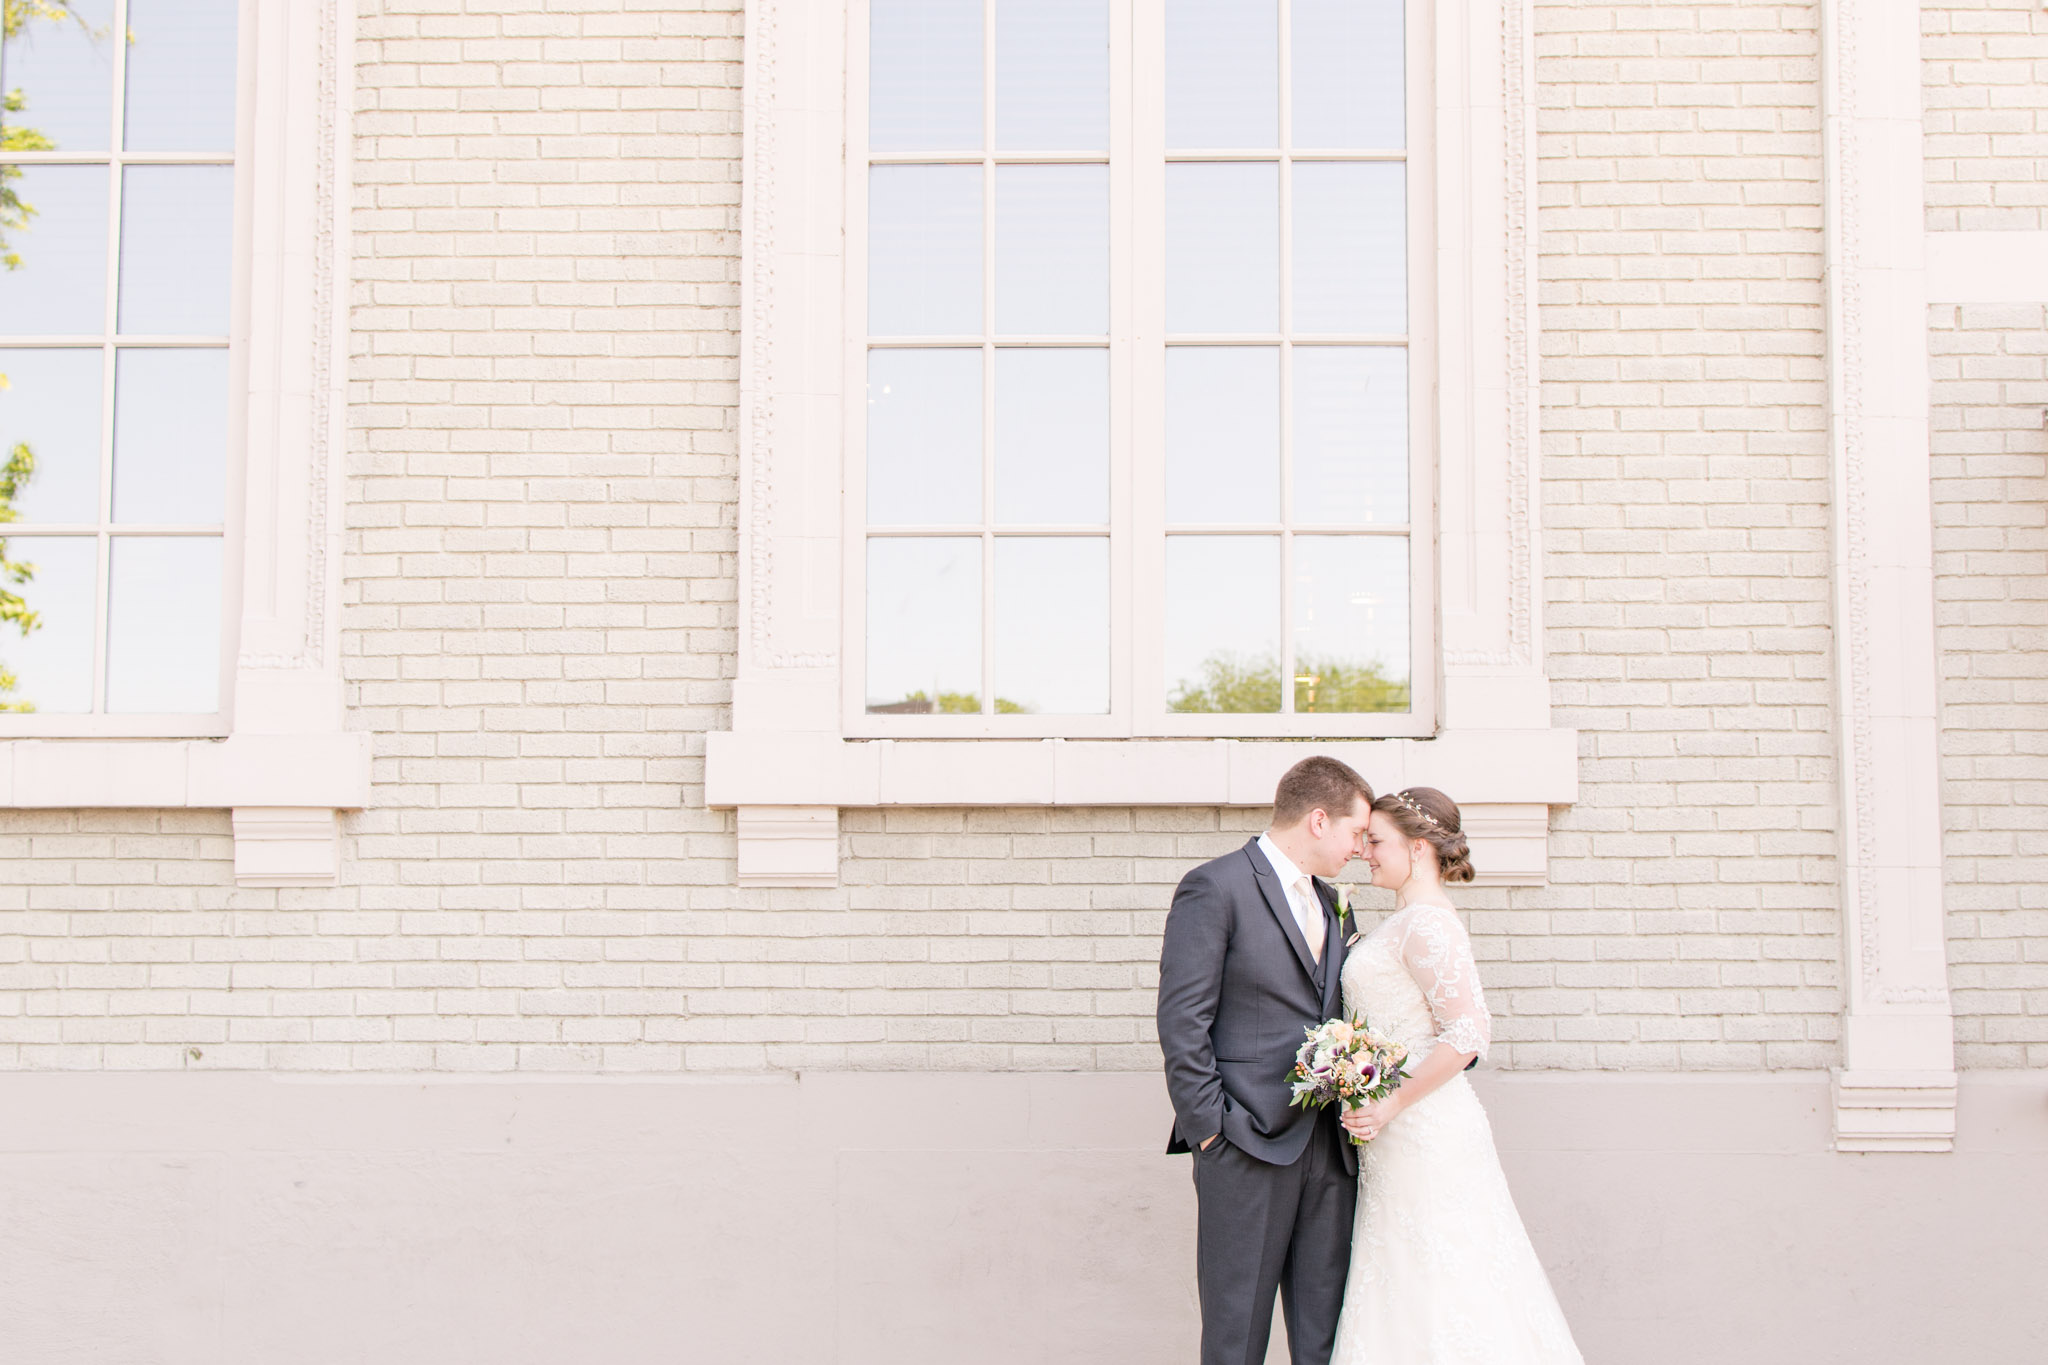 Bride and Groom softly smile in front of large window on wedding day